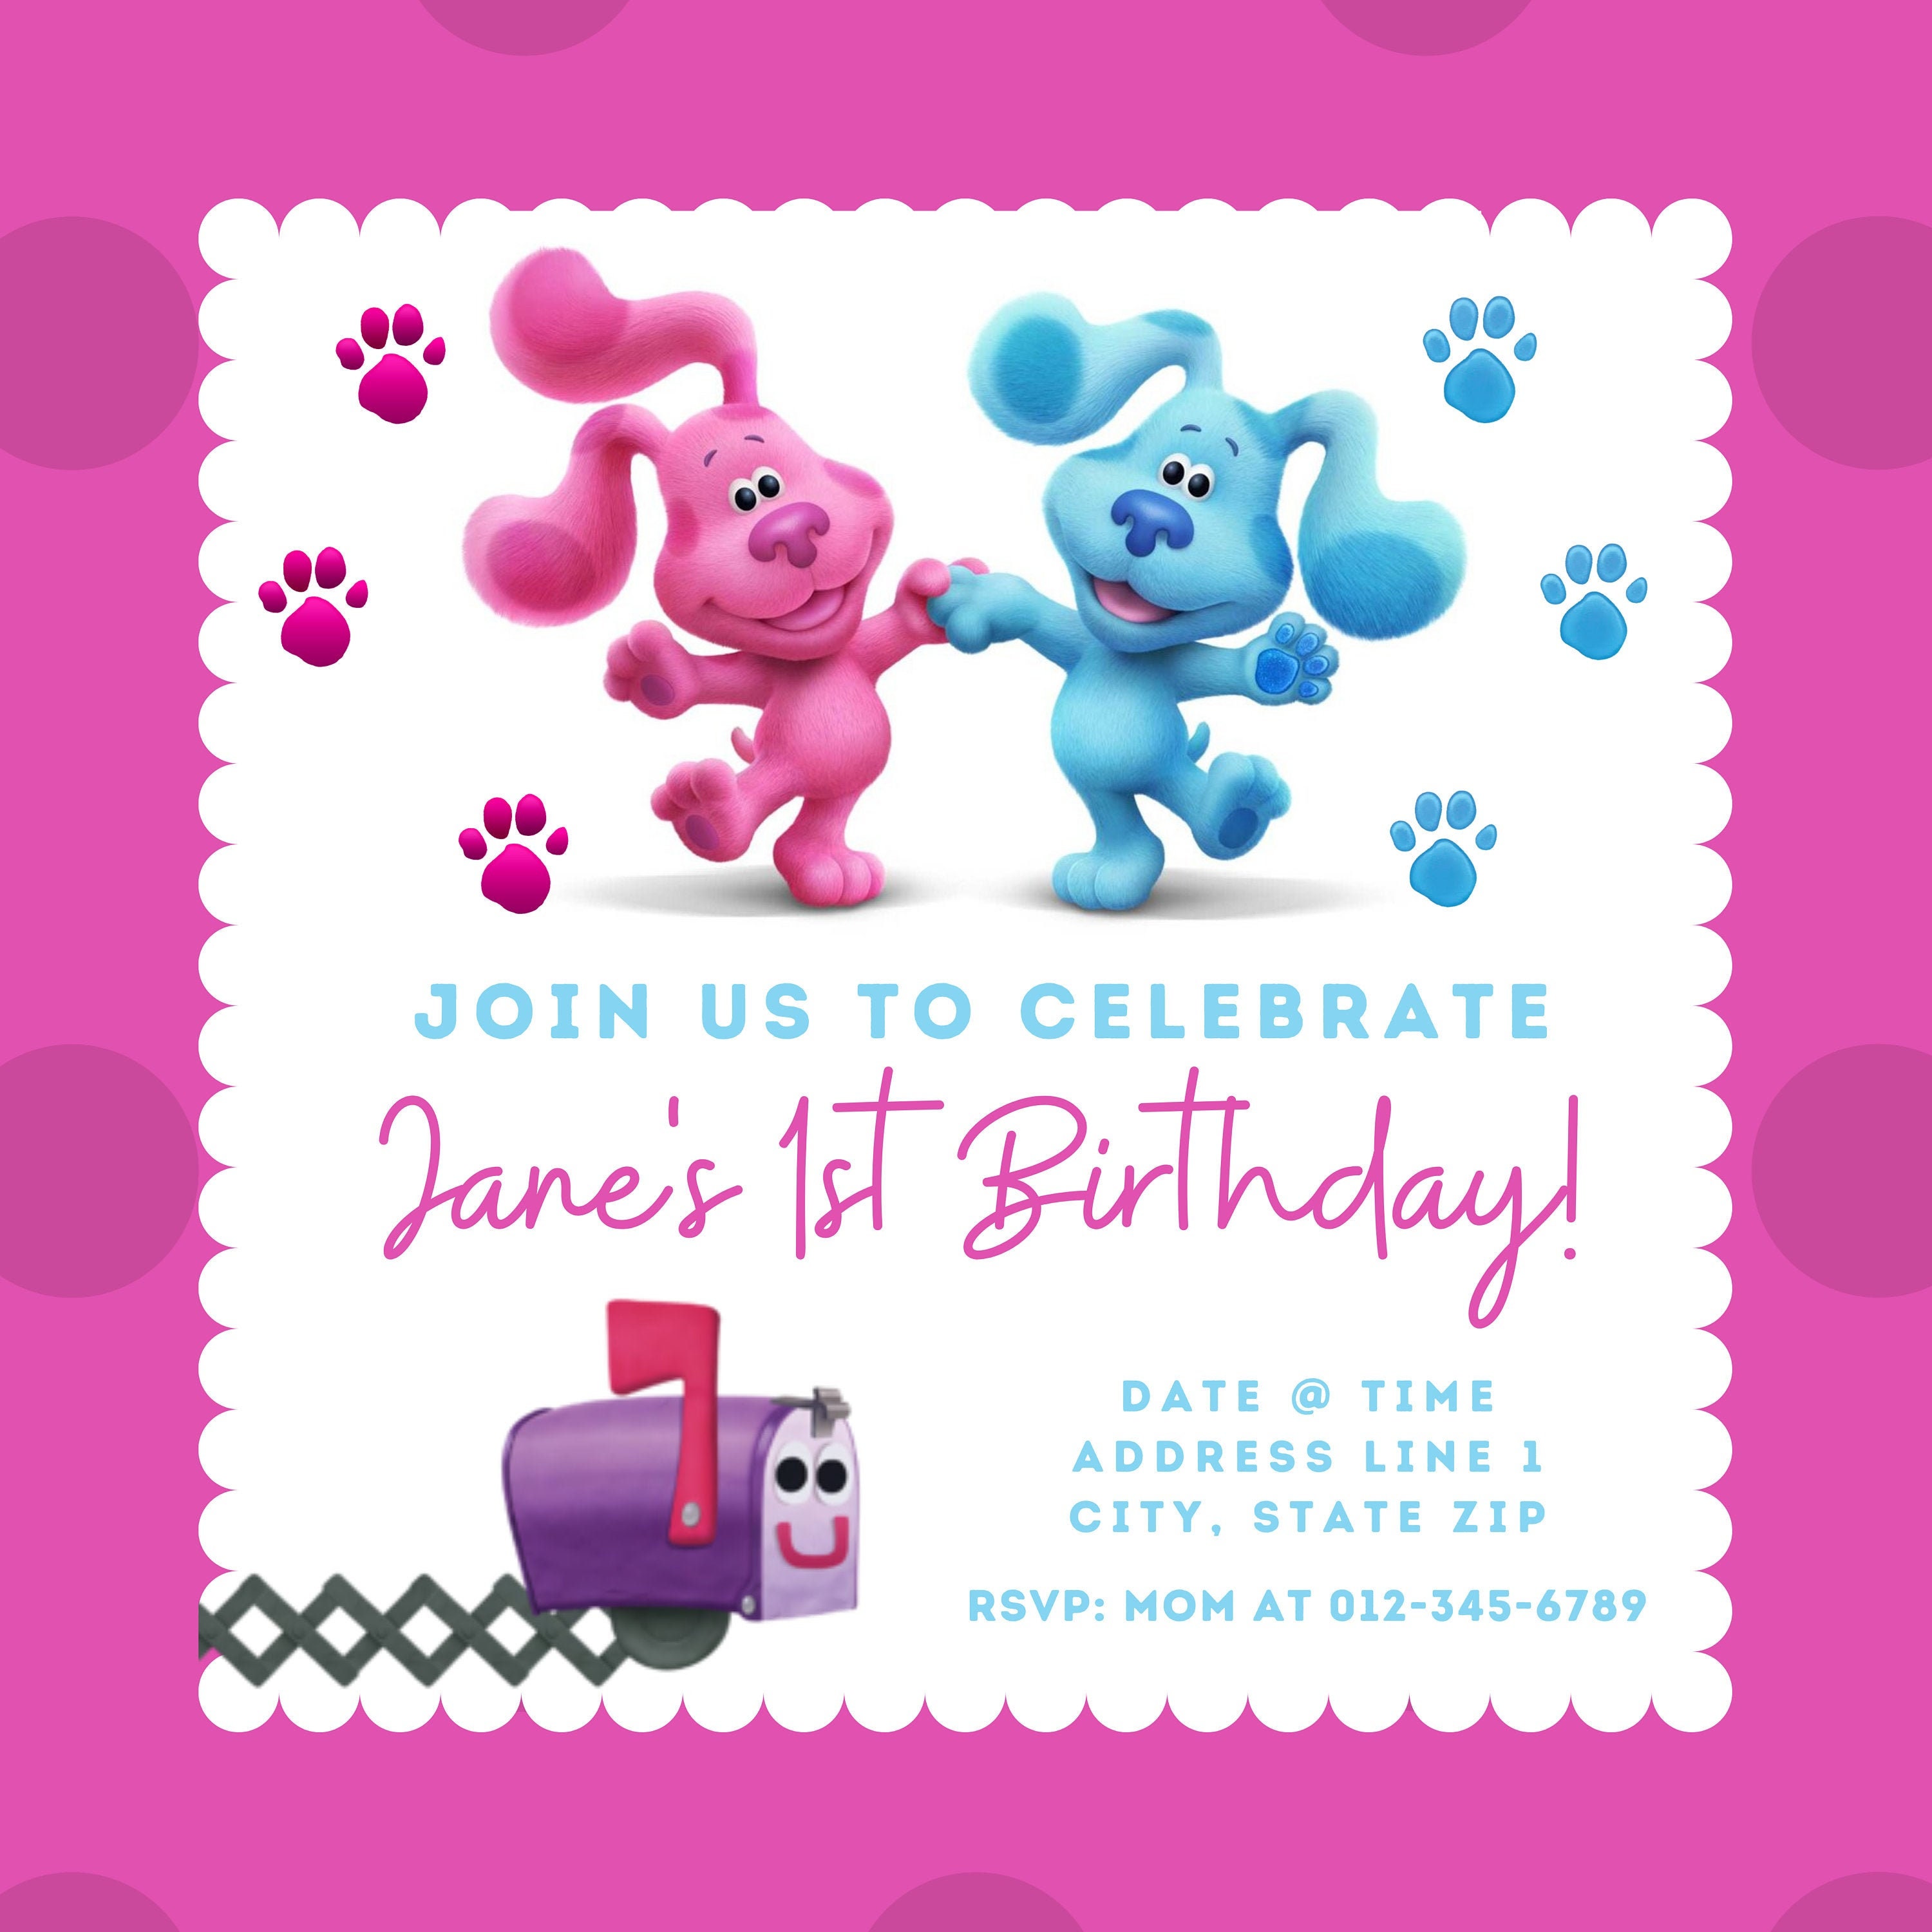 blue-s-clues-you-customizable-invitation-with-magenta-etsy